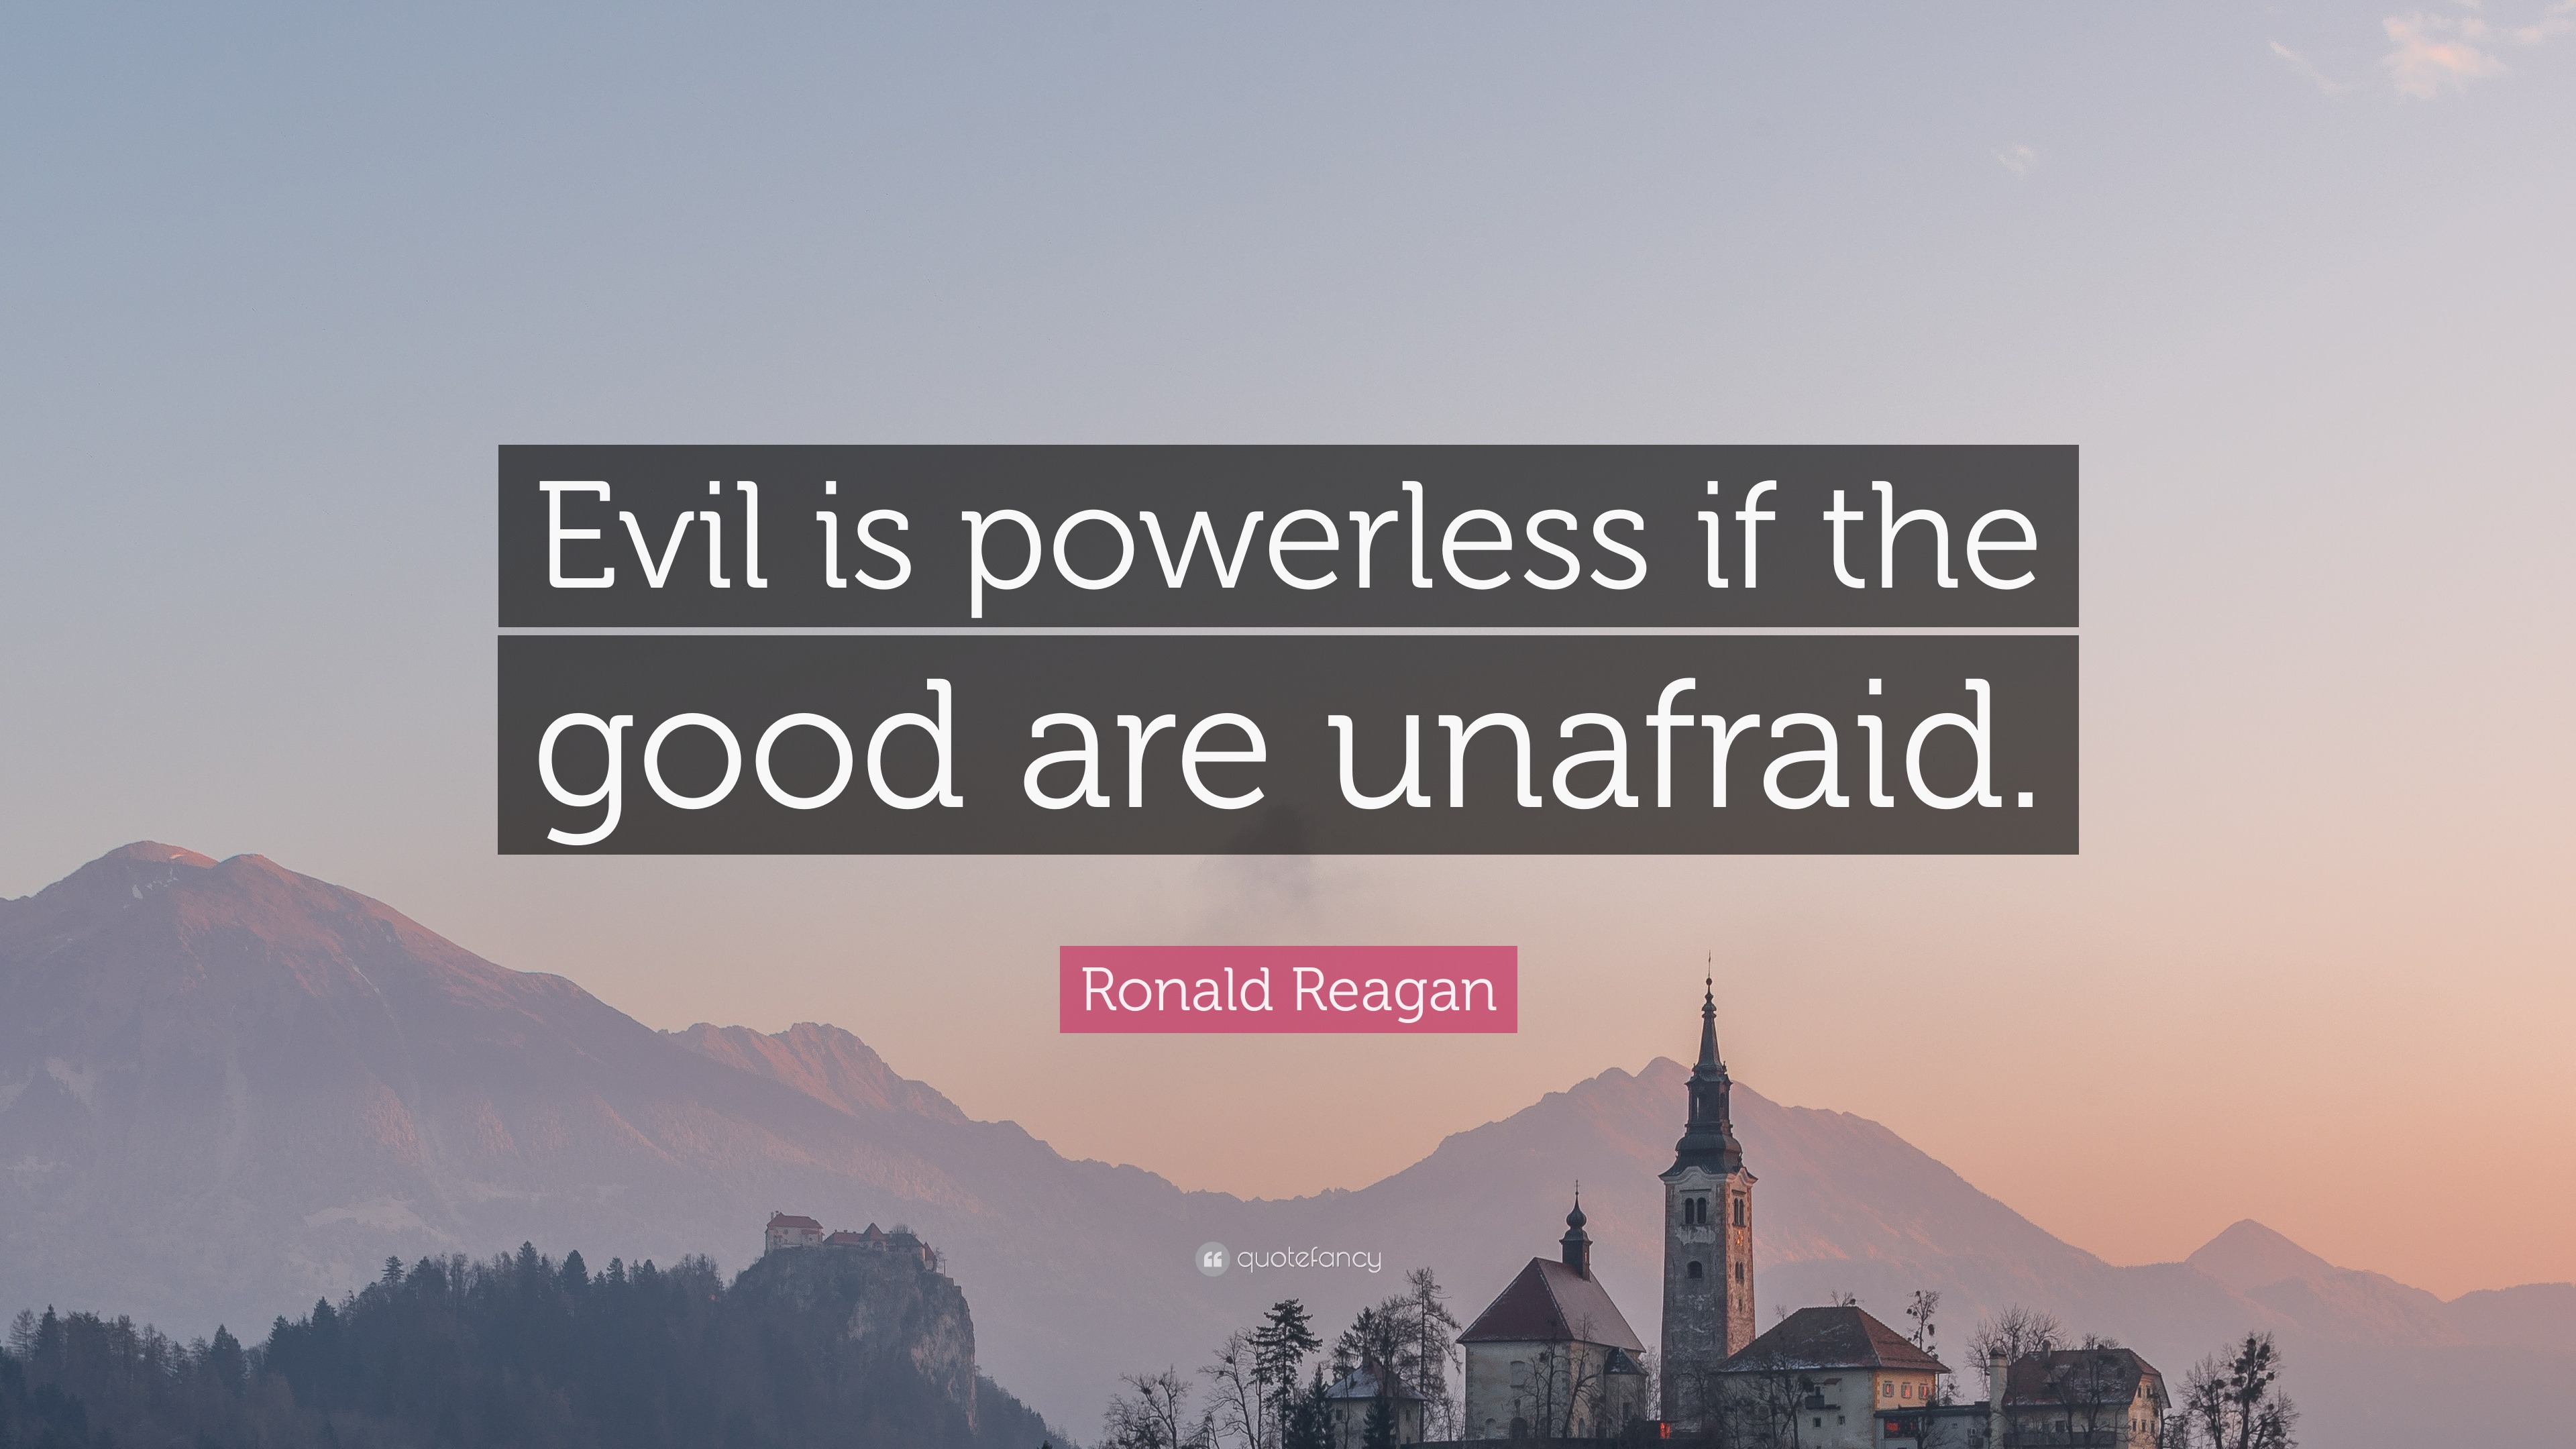 Ronald Reagan Quote: “Evil is powerless if the good are unafraid.” (12